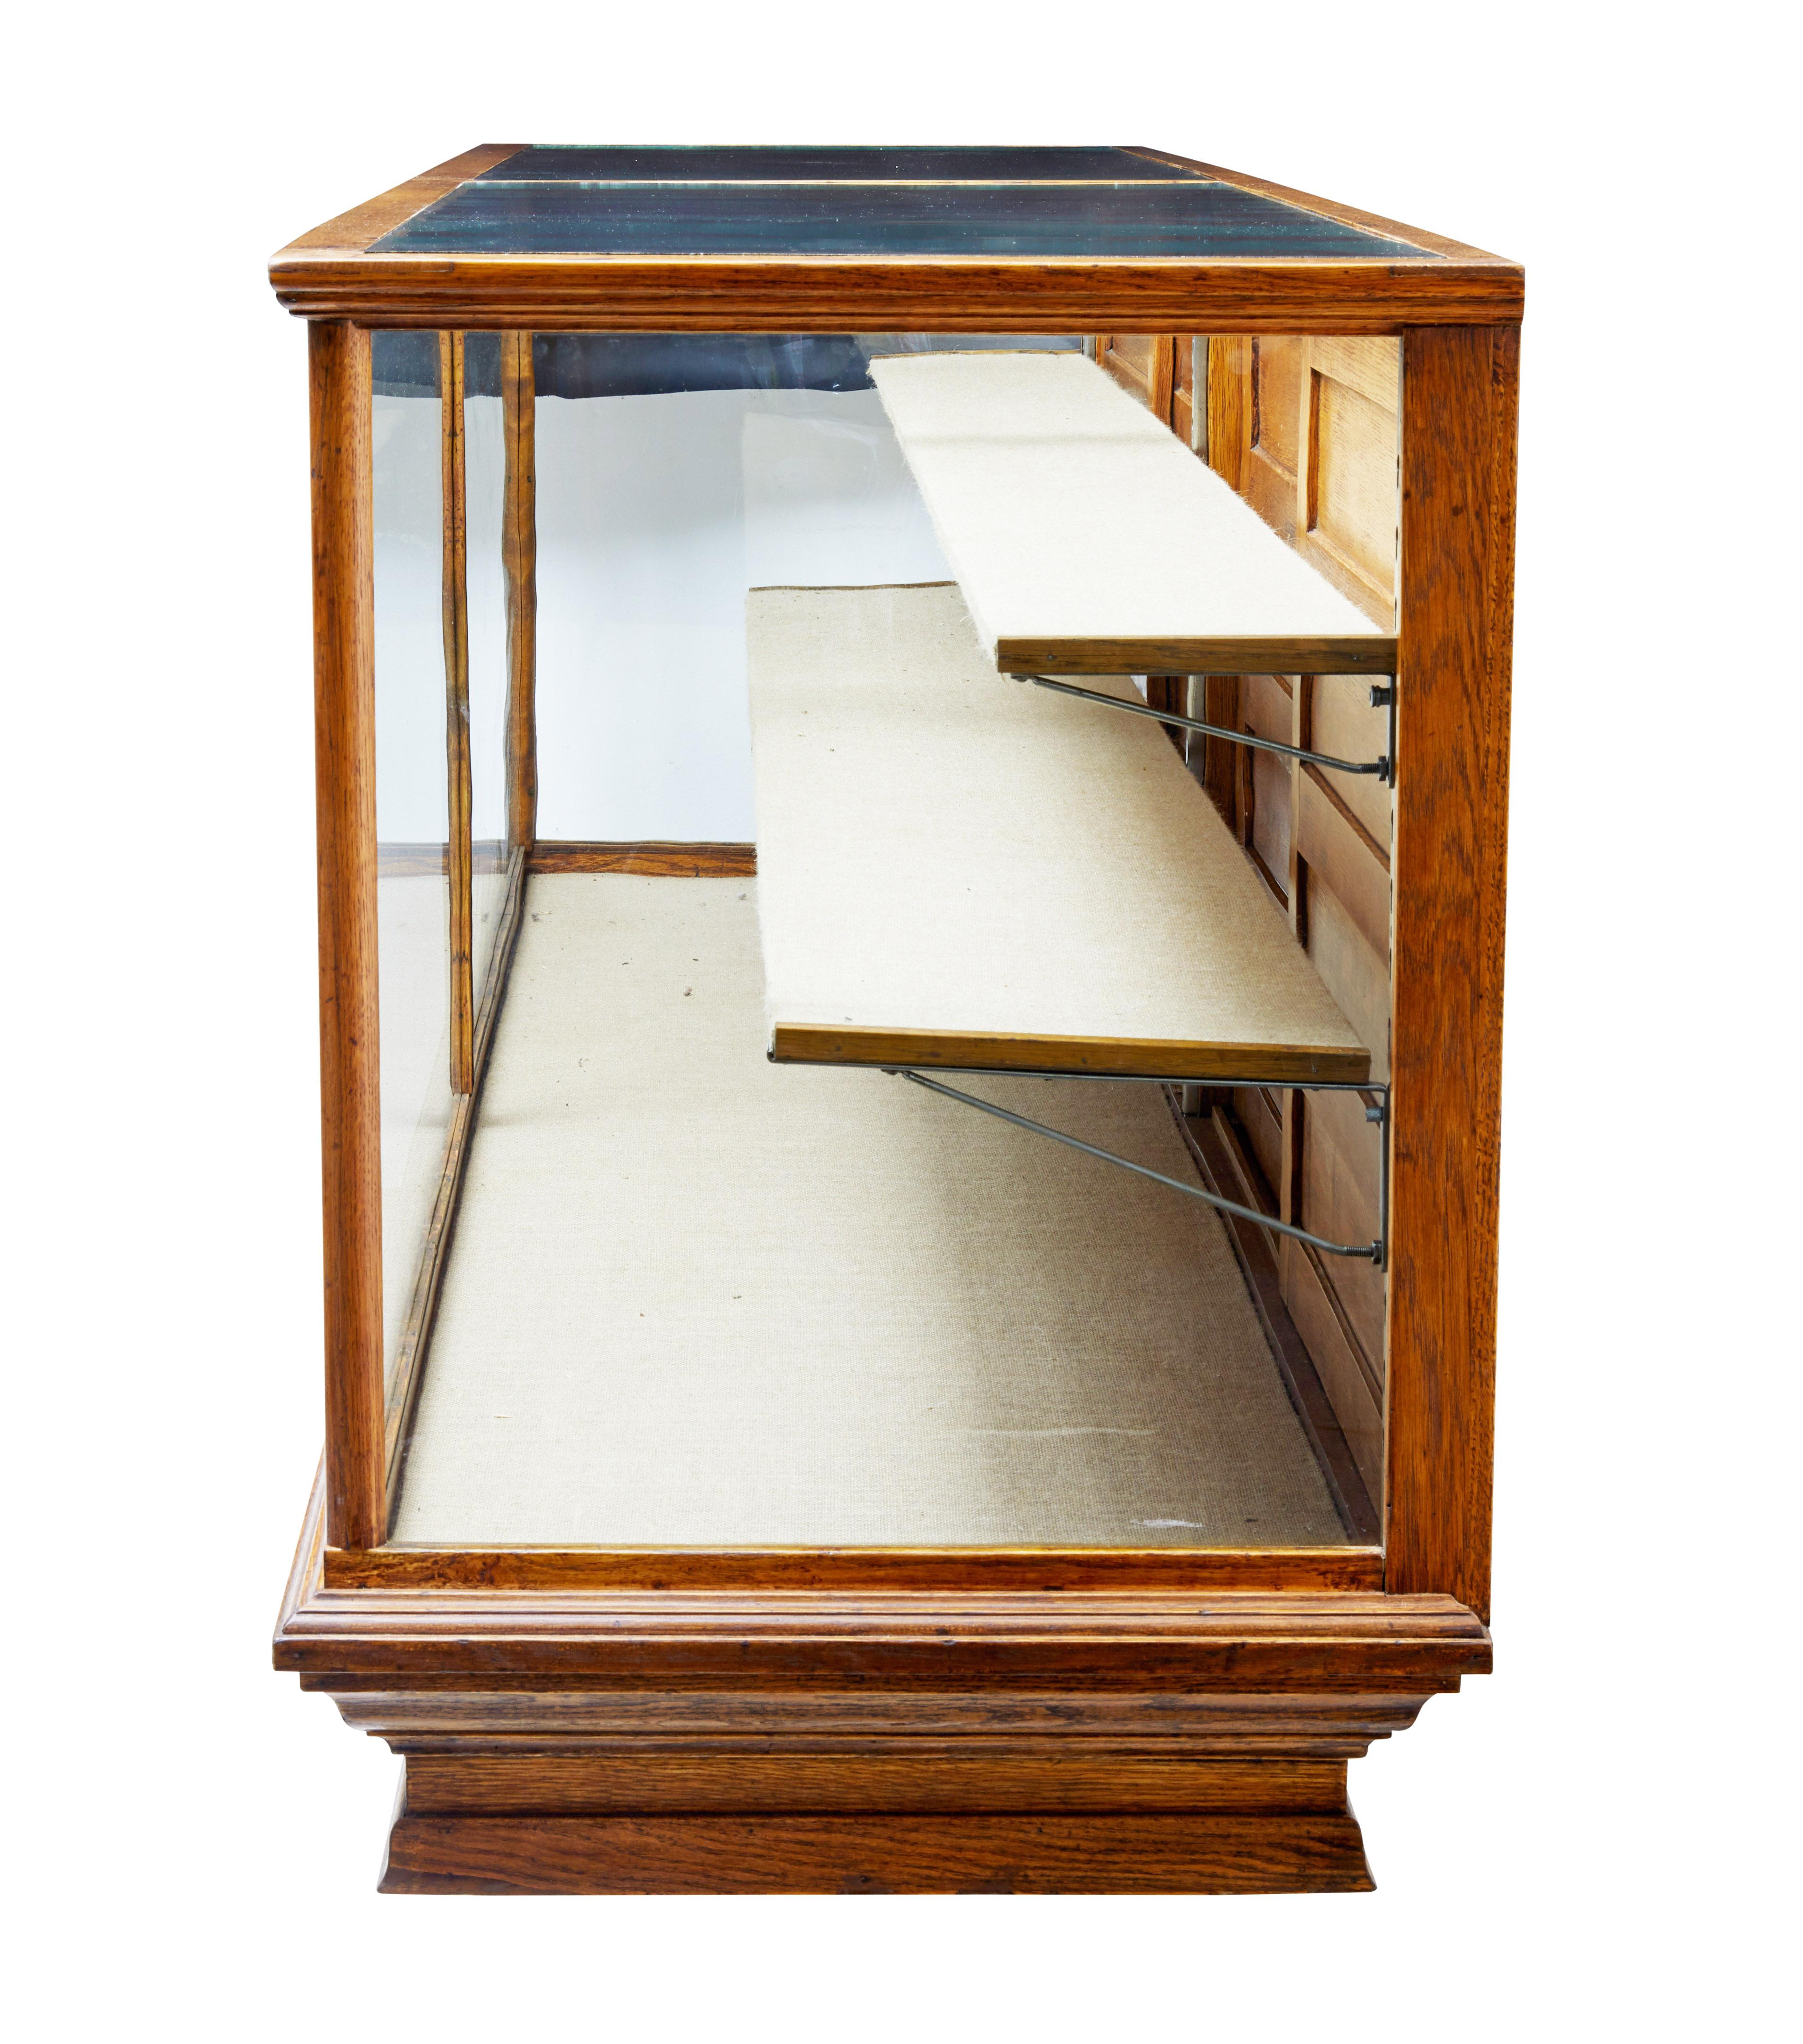 Fantastic haberdashery display cabinet of large proportions, circa 1910.

Glazed front, sides and top surfaces. 2 adjustable shelves and base display area which is hessian covered.

To the back are 4 sliding doors which allows access to the